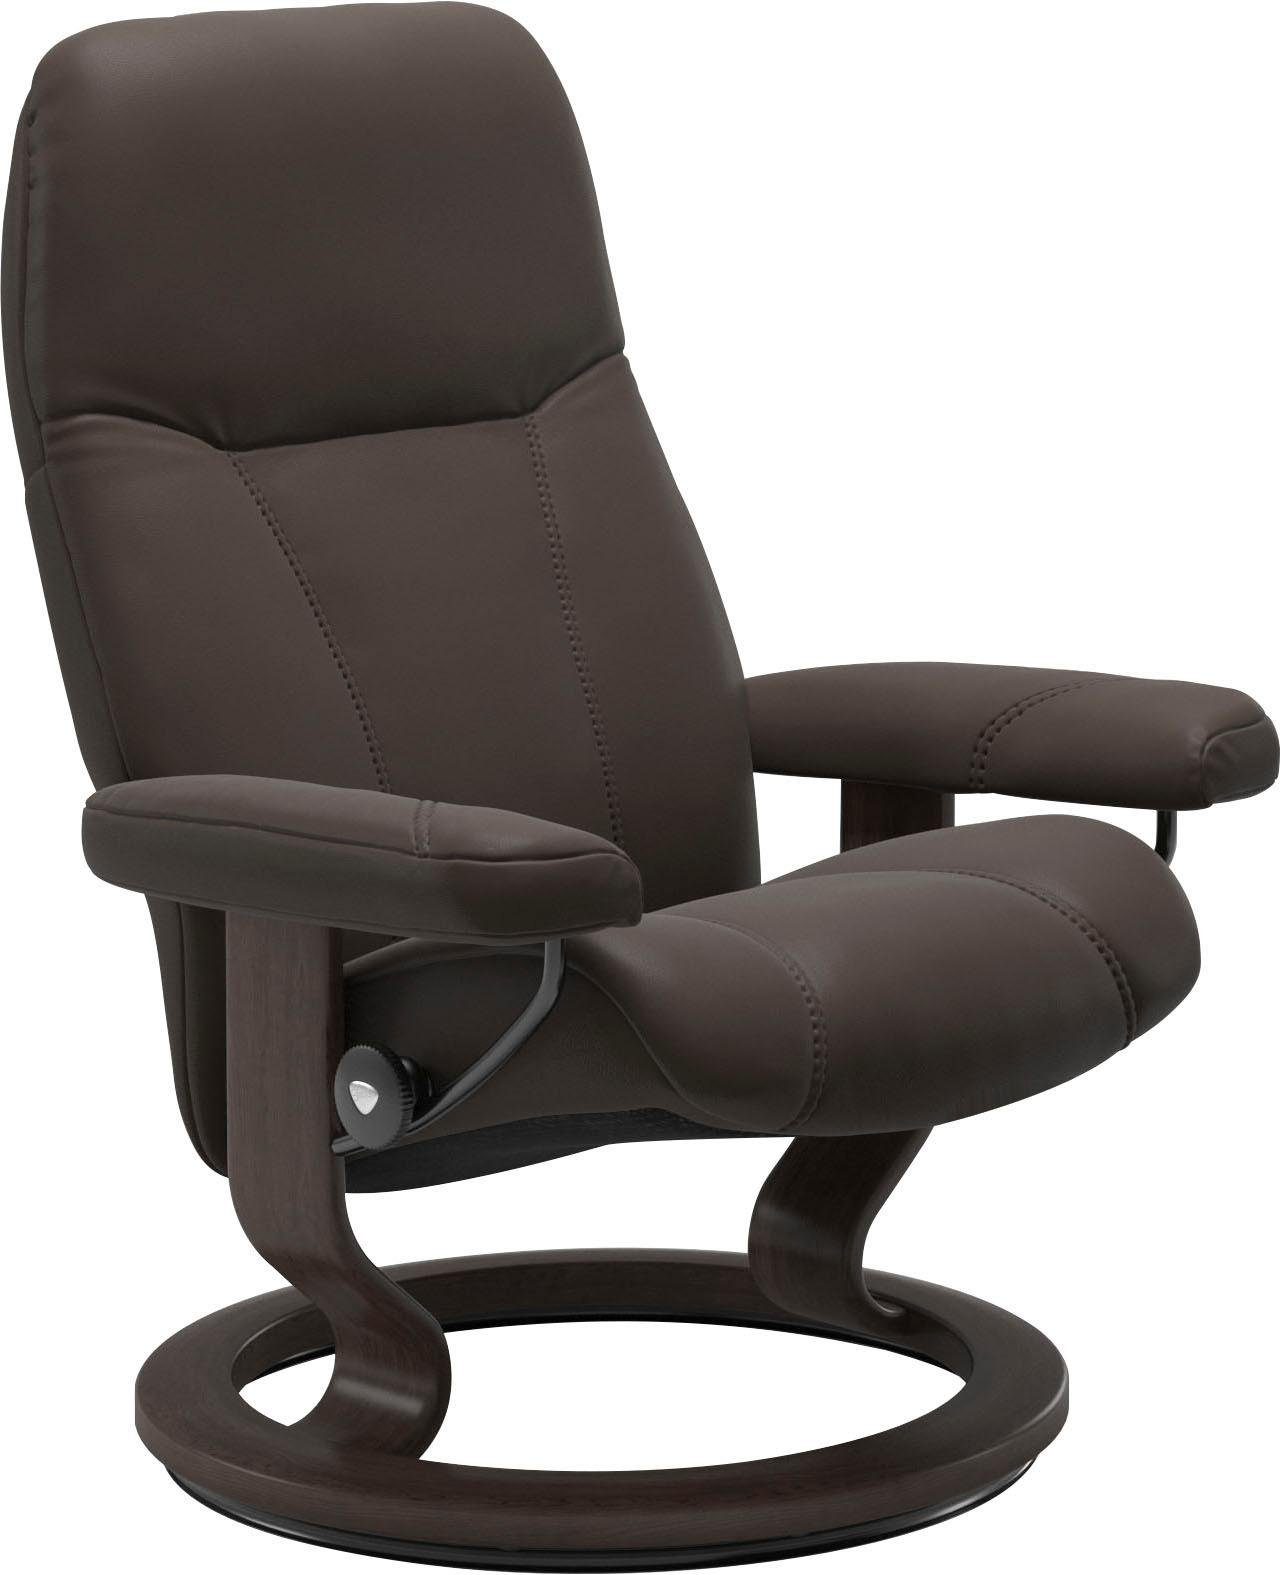 Gestell Classic Größe Consul, mit Wenge Relaxsessel Base, S, Stressless®